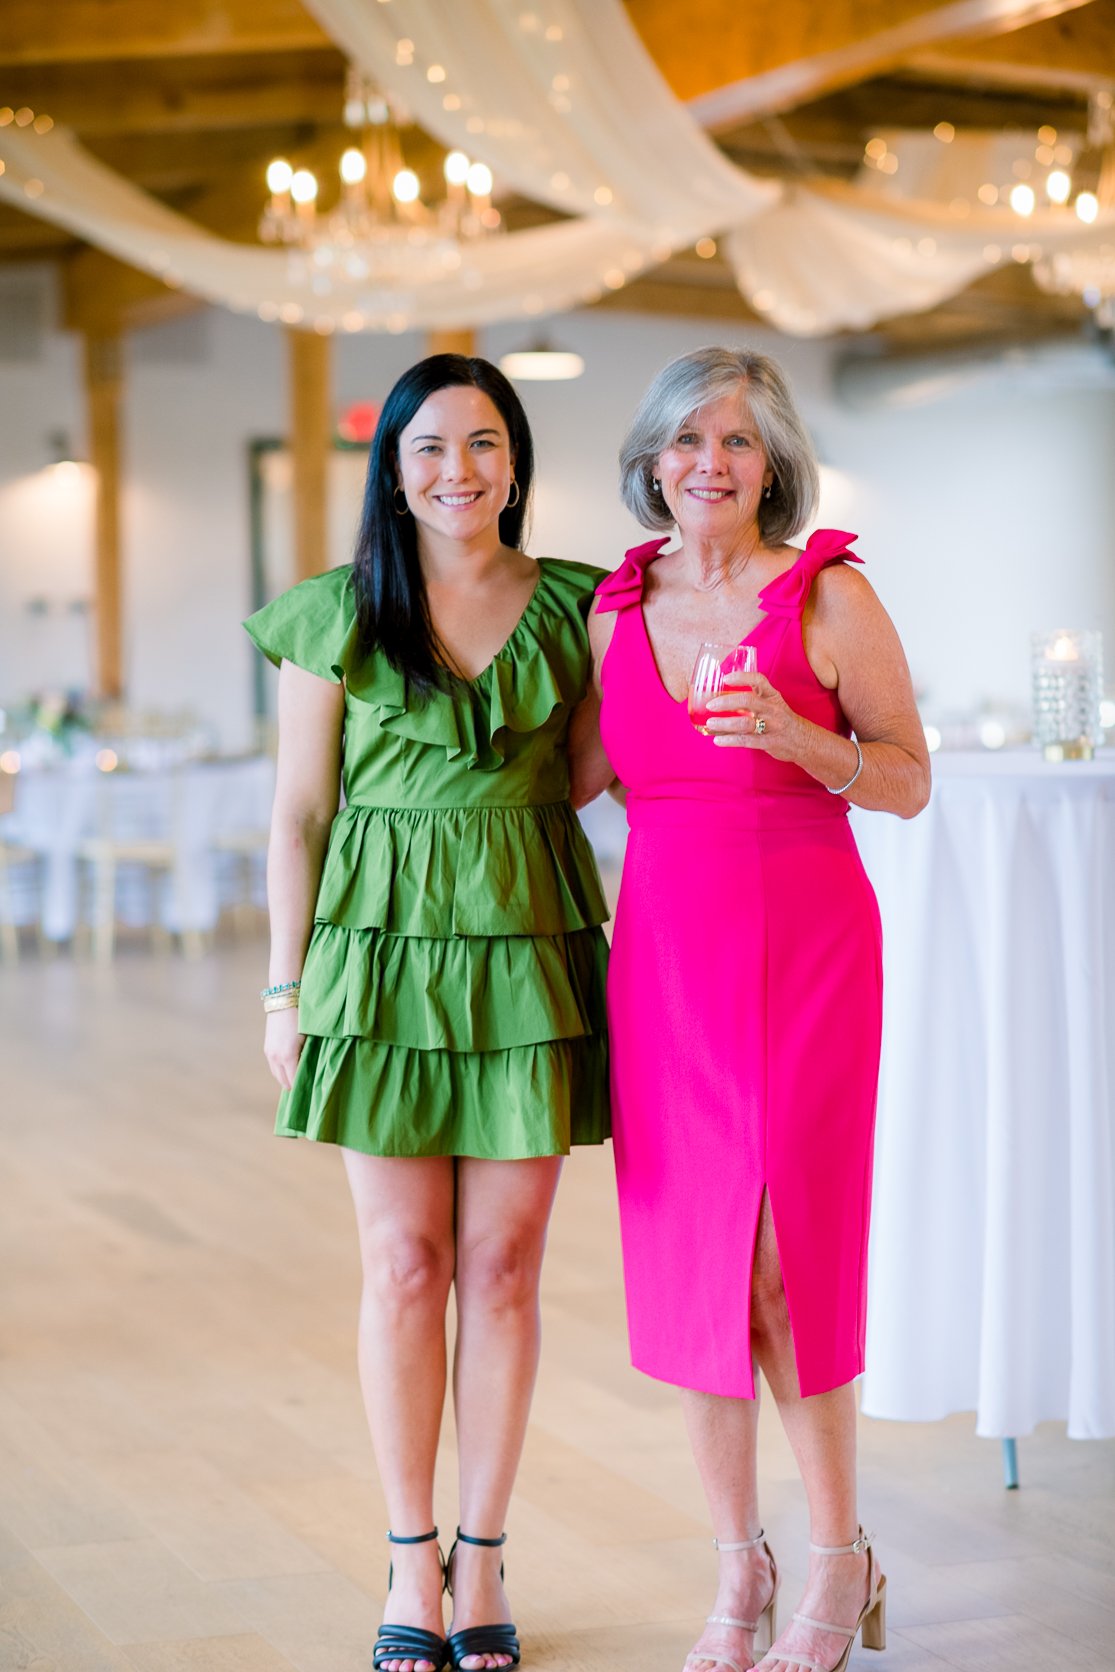 WoolenMill_TheSIlkMill_FredericksburgWeddingVenue_DowntownFredericksburg_VirginiaWeddingVenue_Event_BridalShow2023_youseephotography_pic54.jpg